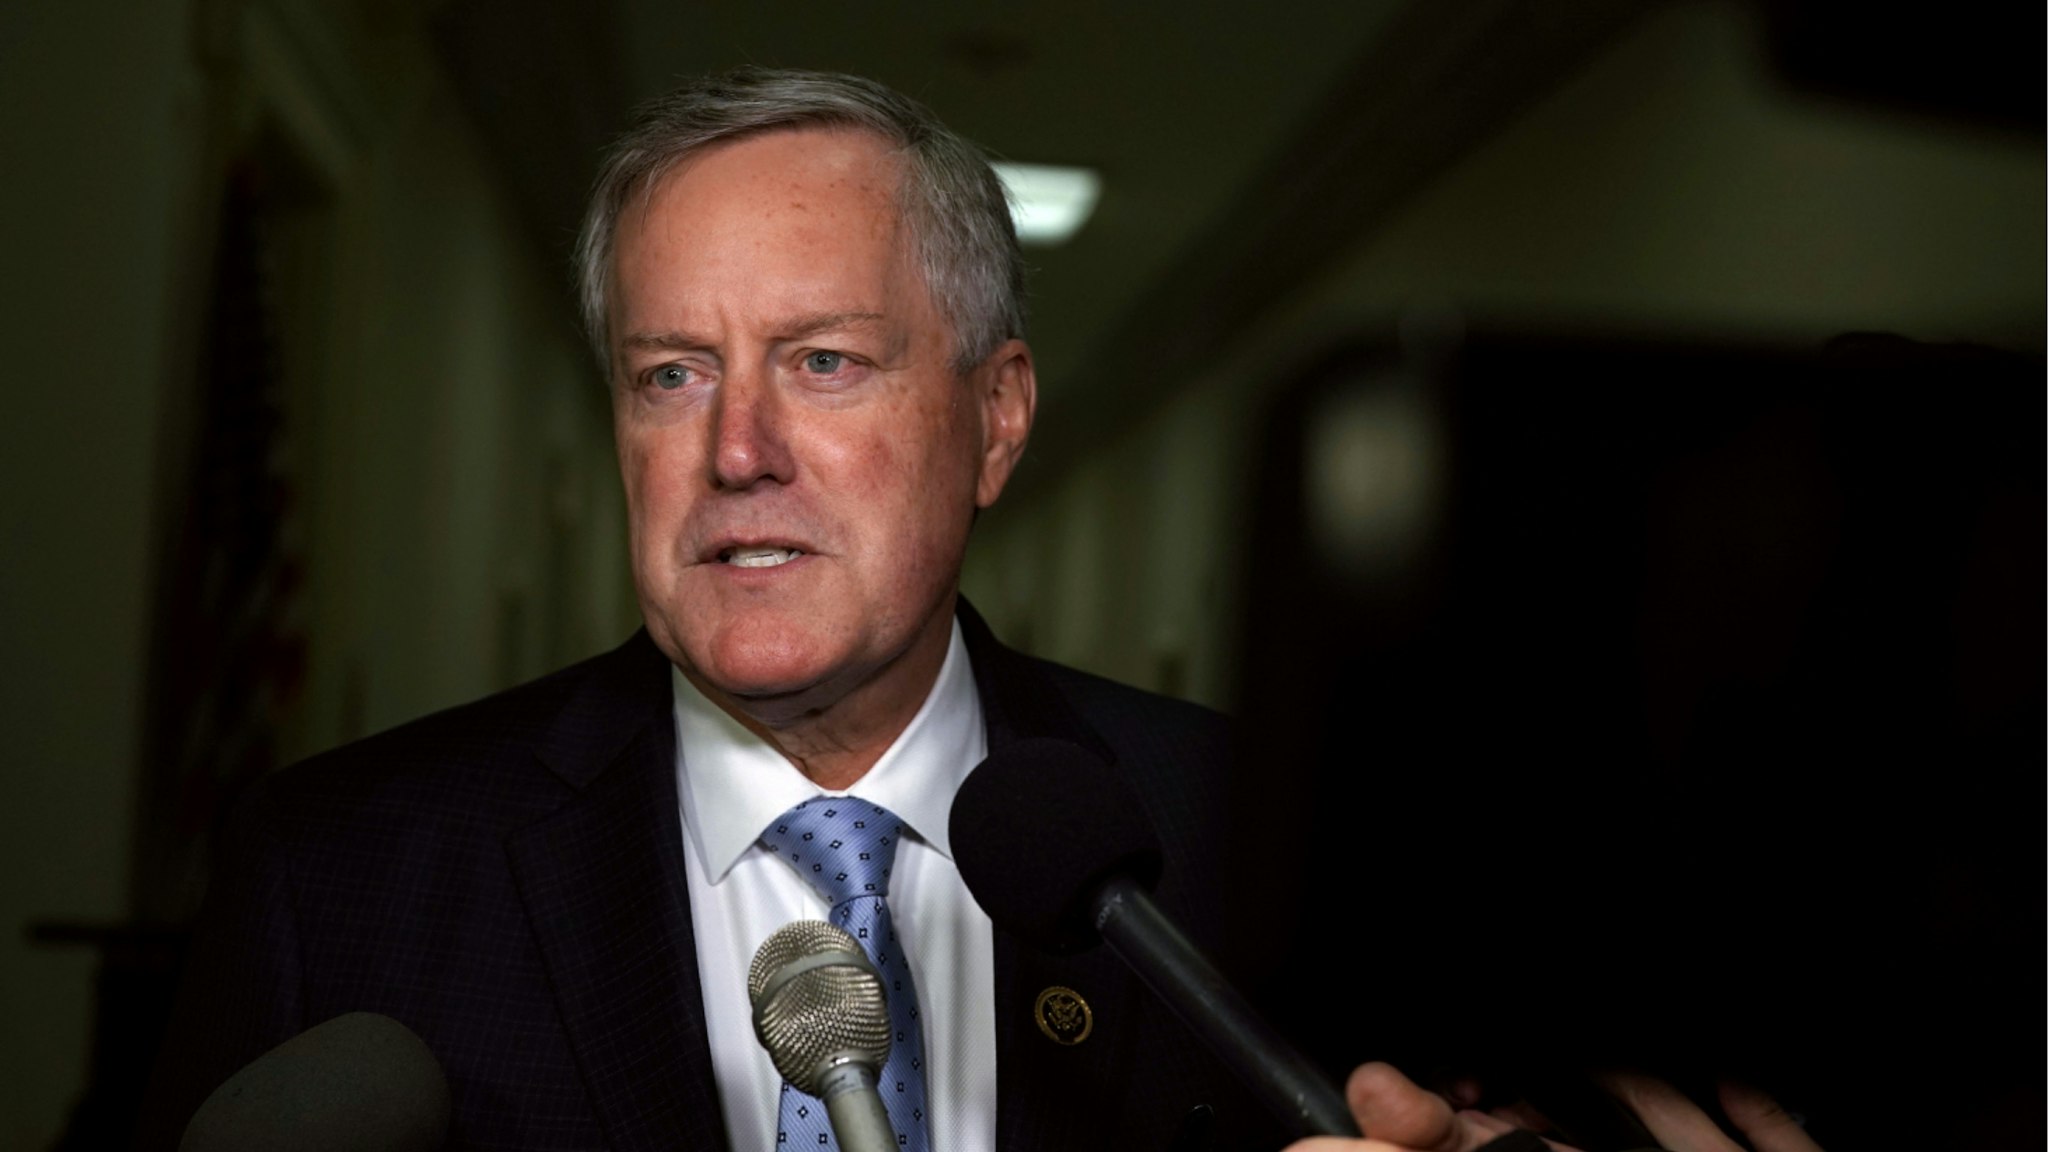 U.S. Rep. Mark Meadows (R-NC) speaks to members of the media as he arrives at the Rayburn House Office Building where former Federal Bureau of Investigation Director James Comey testifies to the House Judiciary and Oversight and Government Reform committees on Capitol Hill December 07, 2018 in Washington, DC.